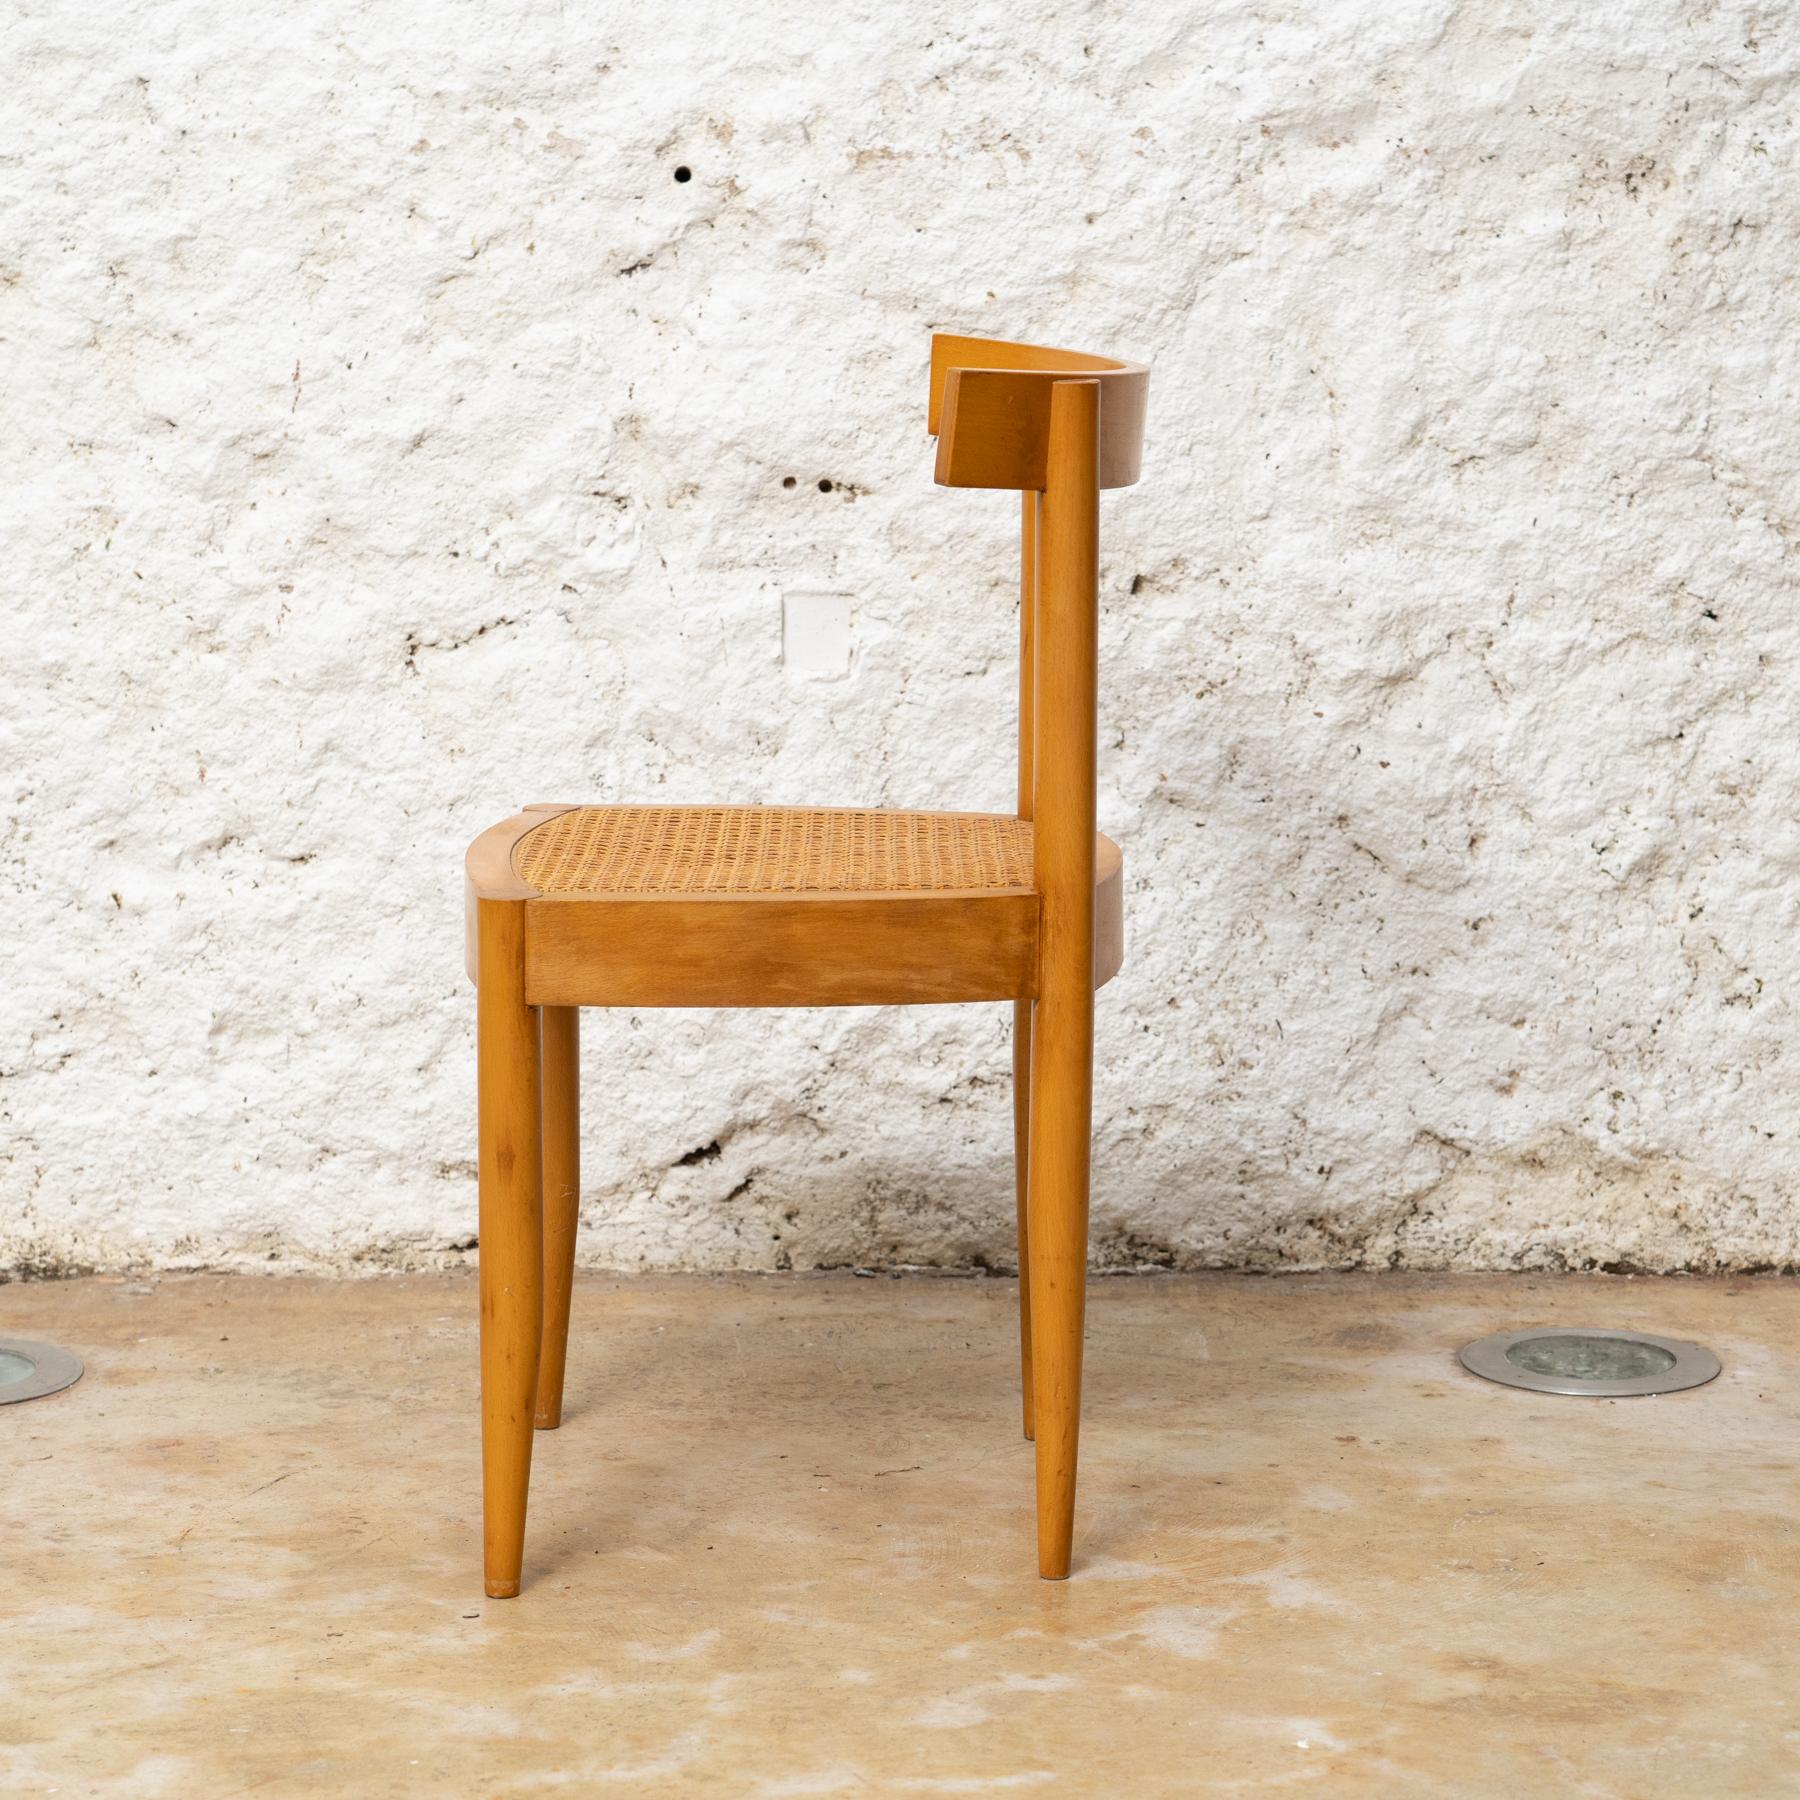 Wood Timeless Design: 'Reno' Chair by Correa and Milà for Gres, Spain, circa 1961 For Sale